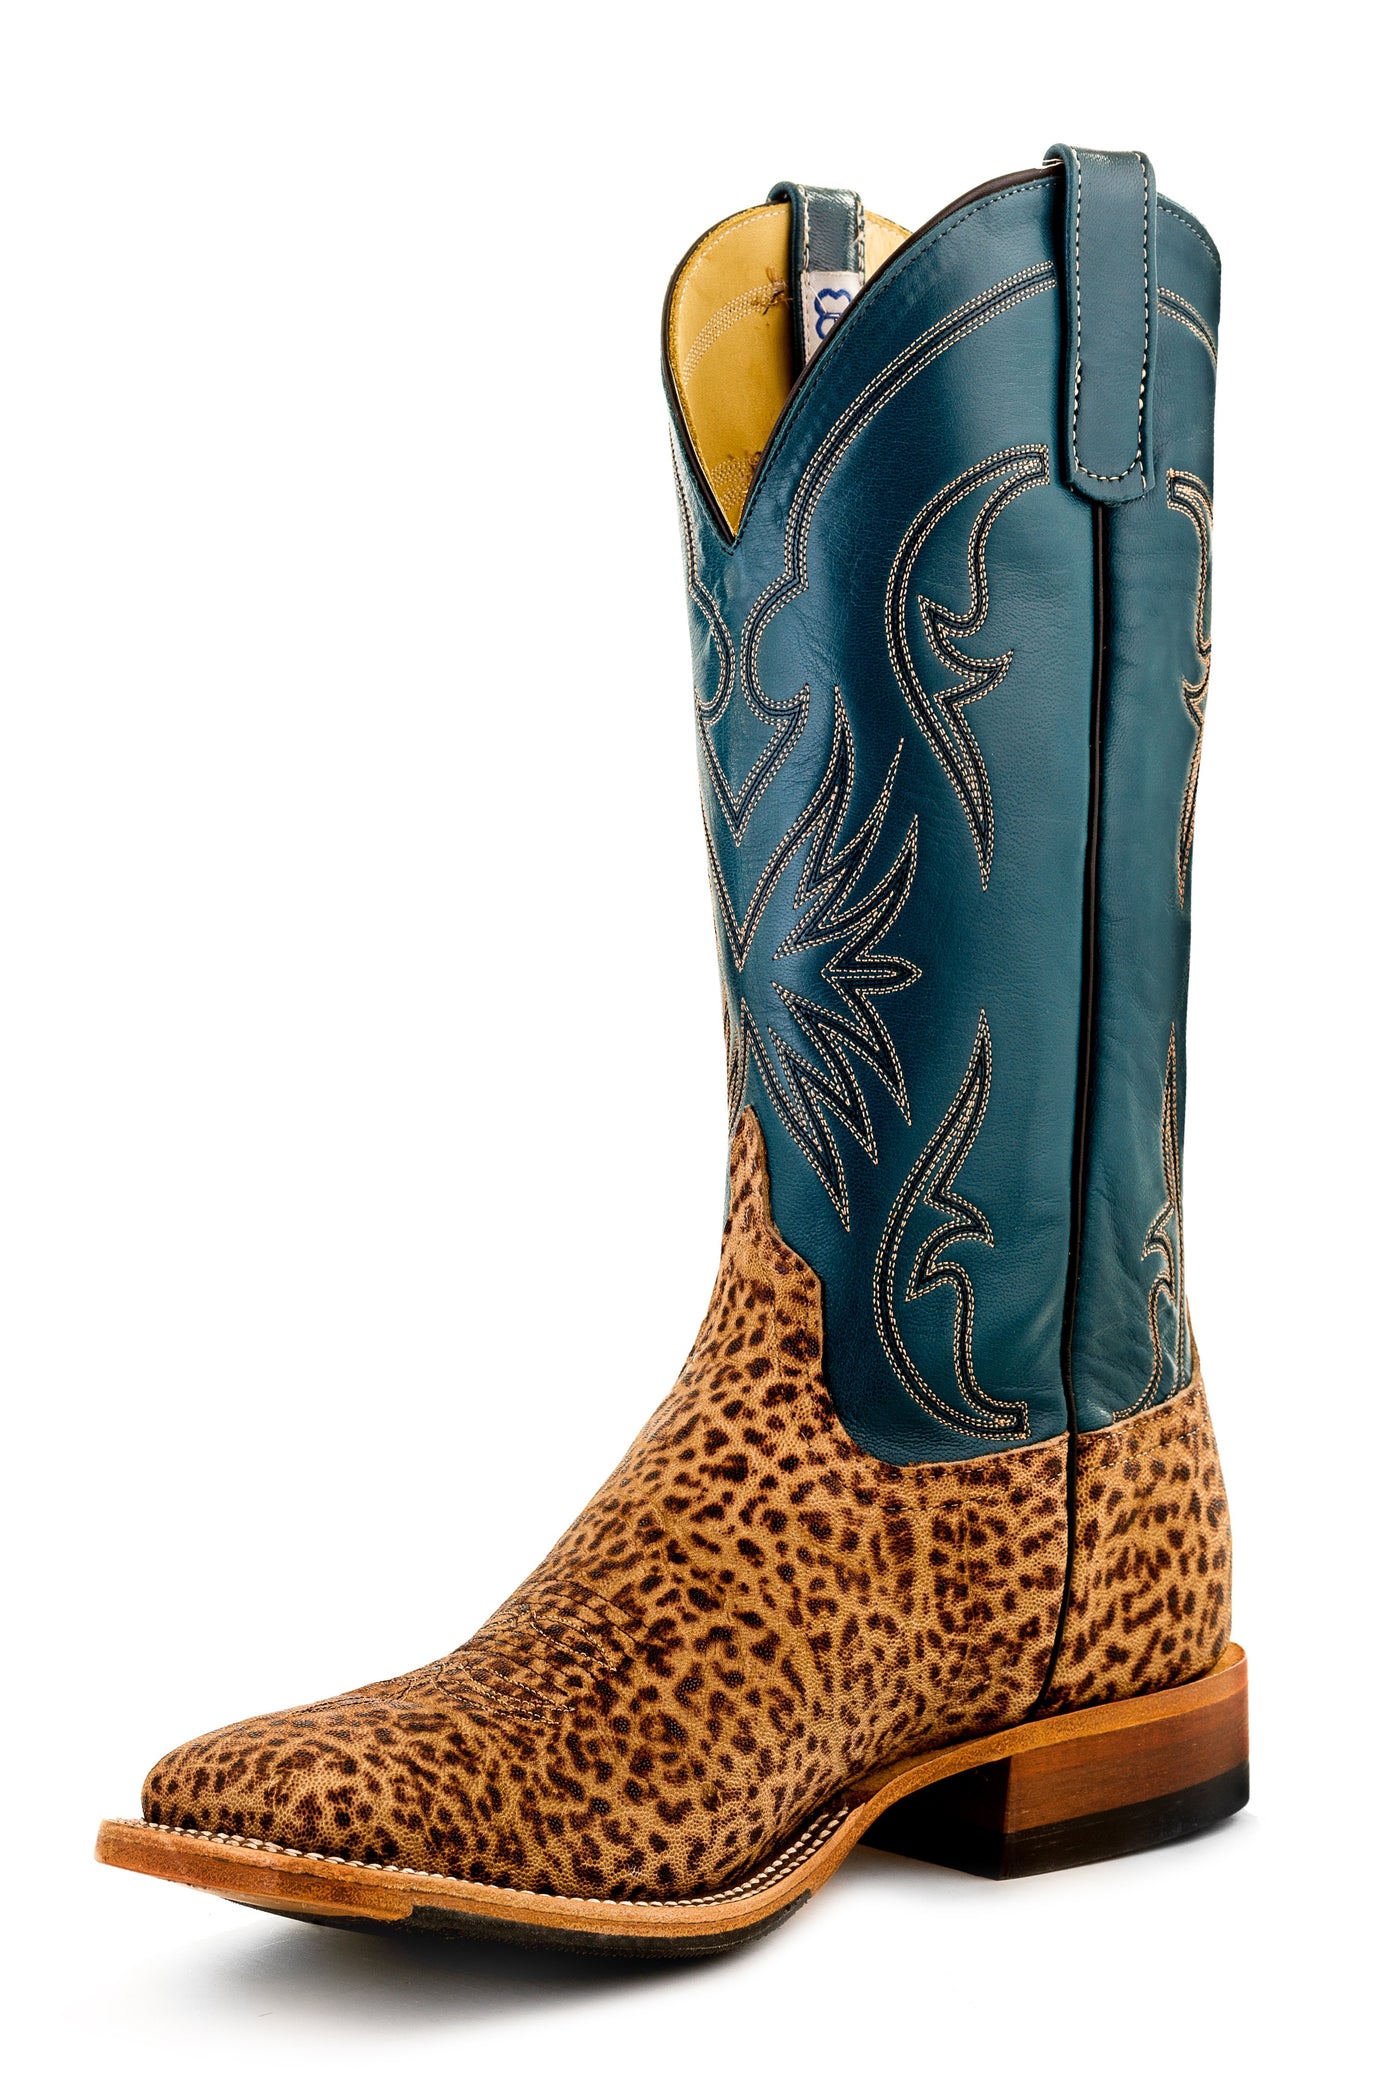 elephant boots anderson bean